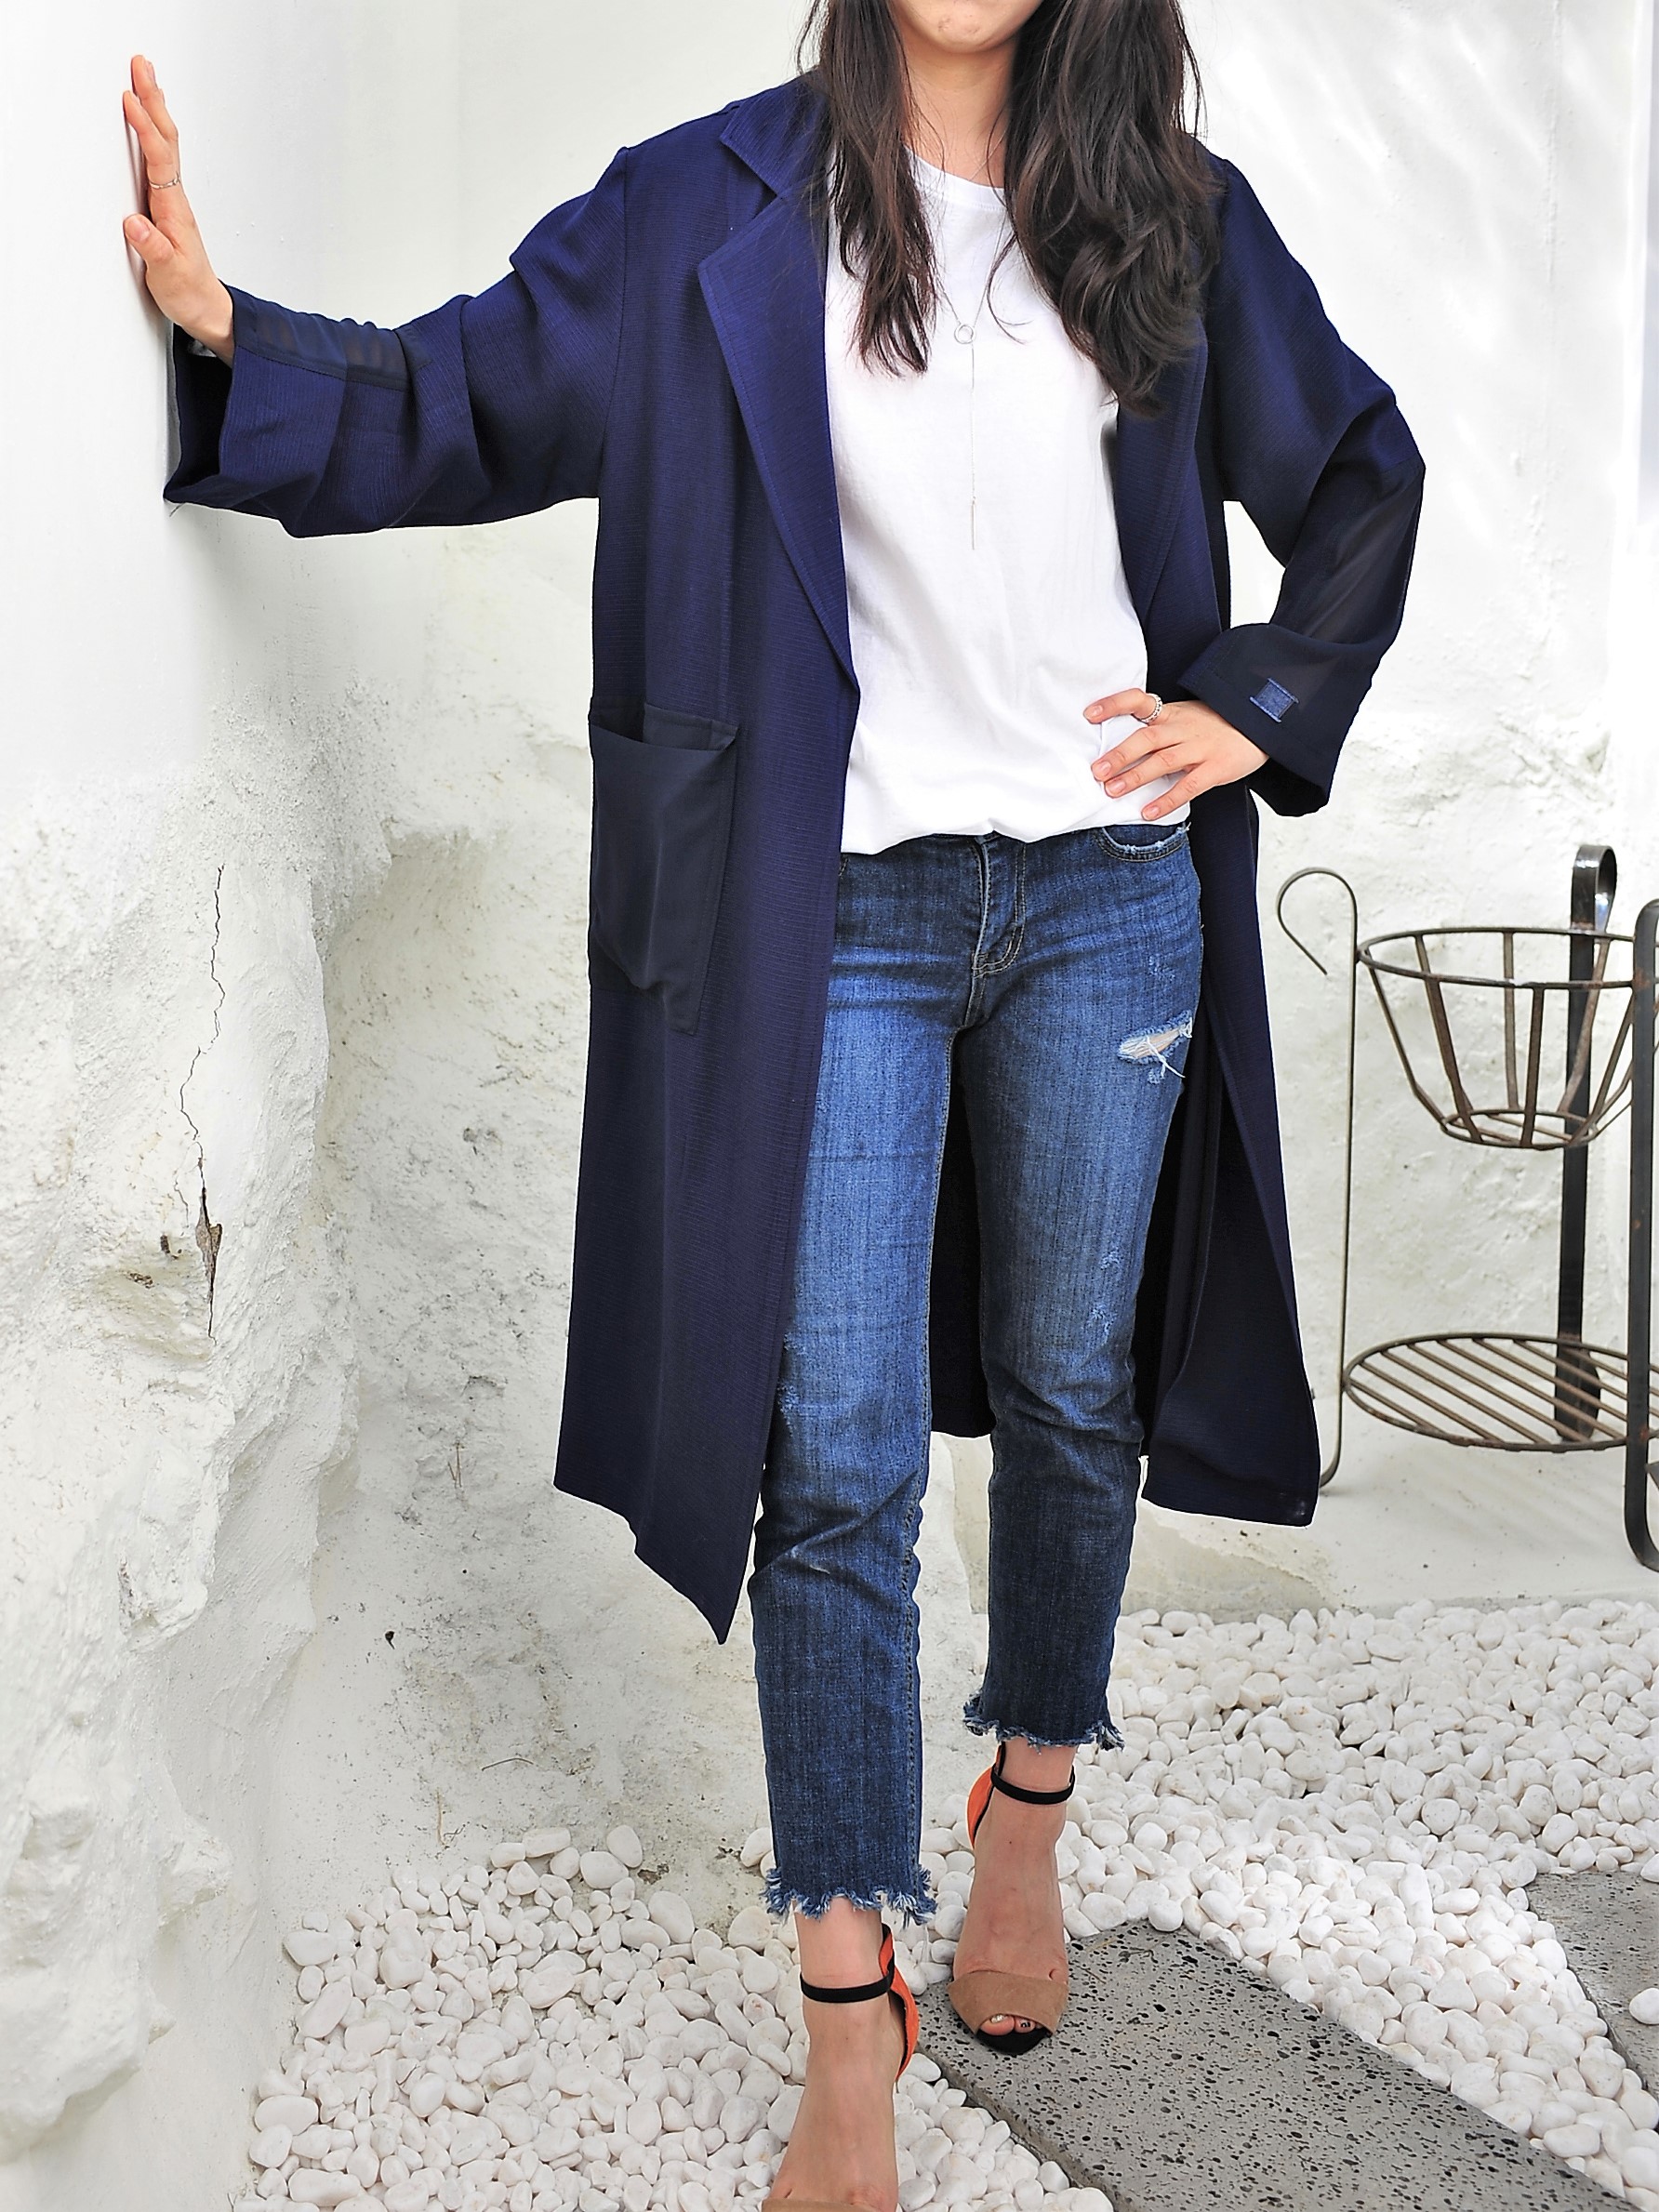 Robe style coloring trench coat (Navy)